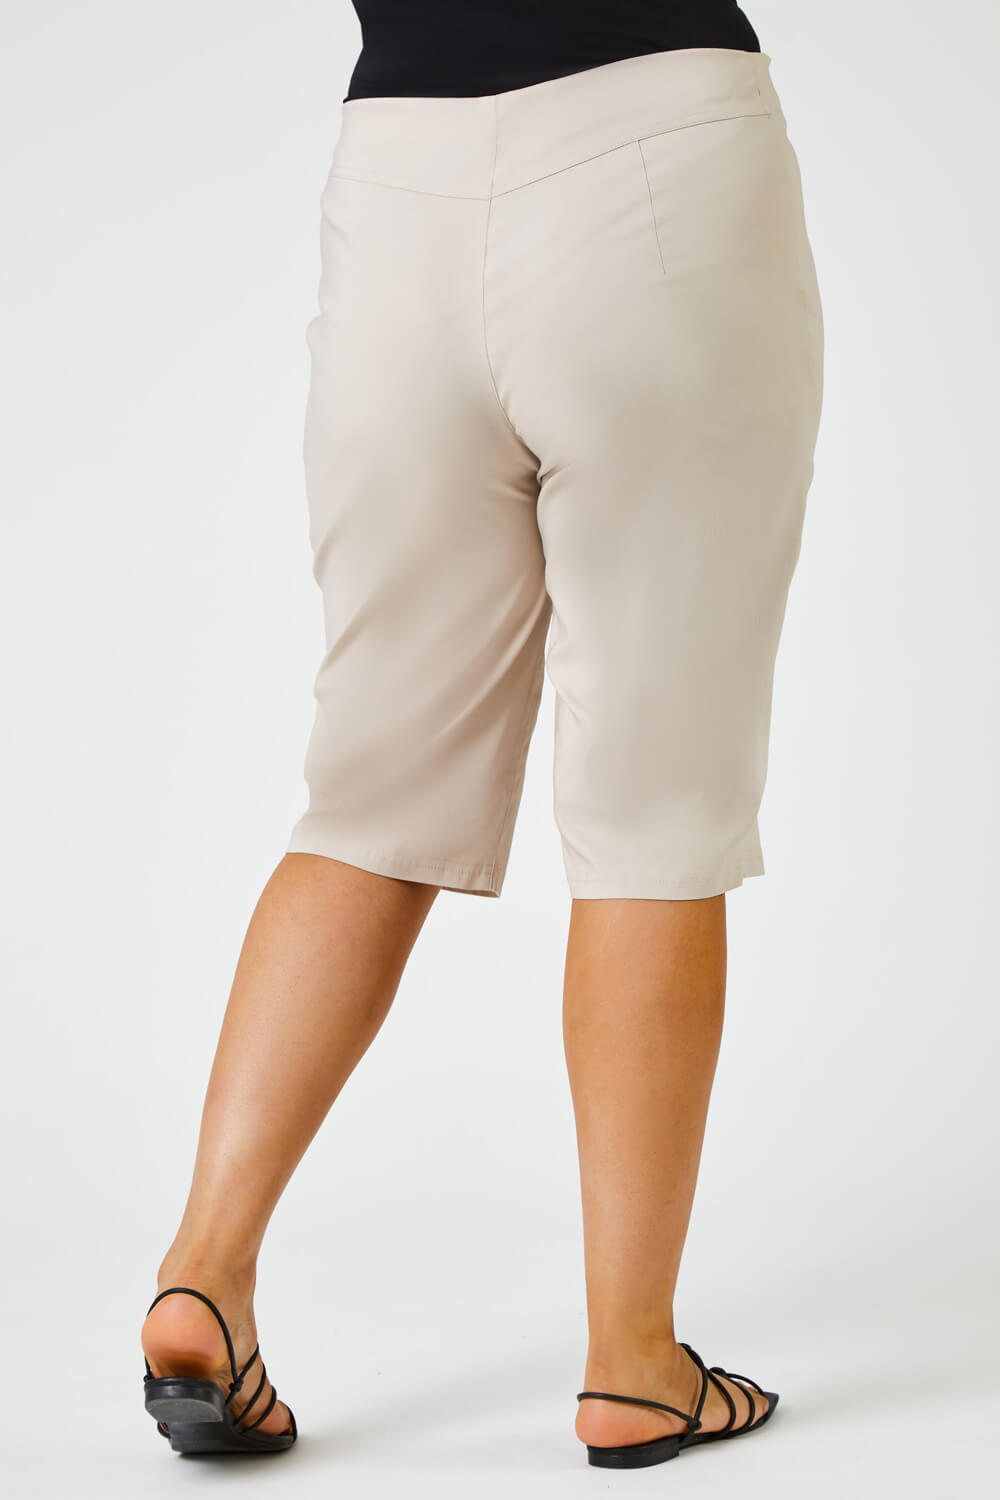 Stone Curve Knee Length Stretch Shorts, Image 4 of 4